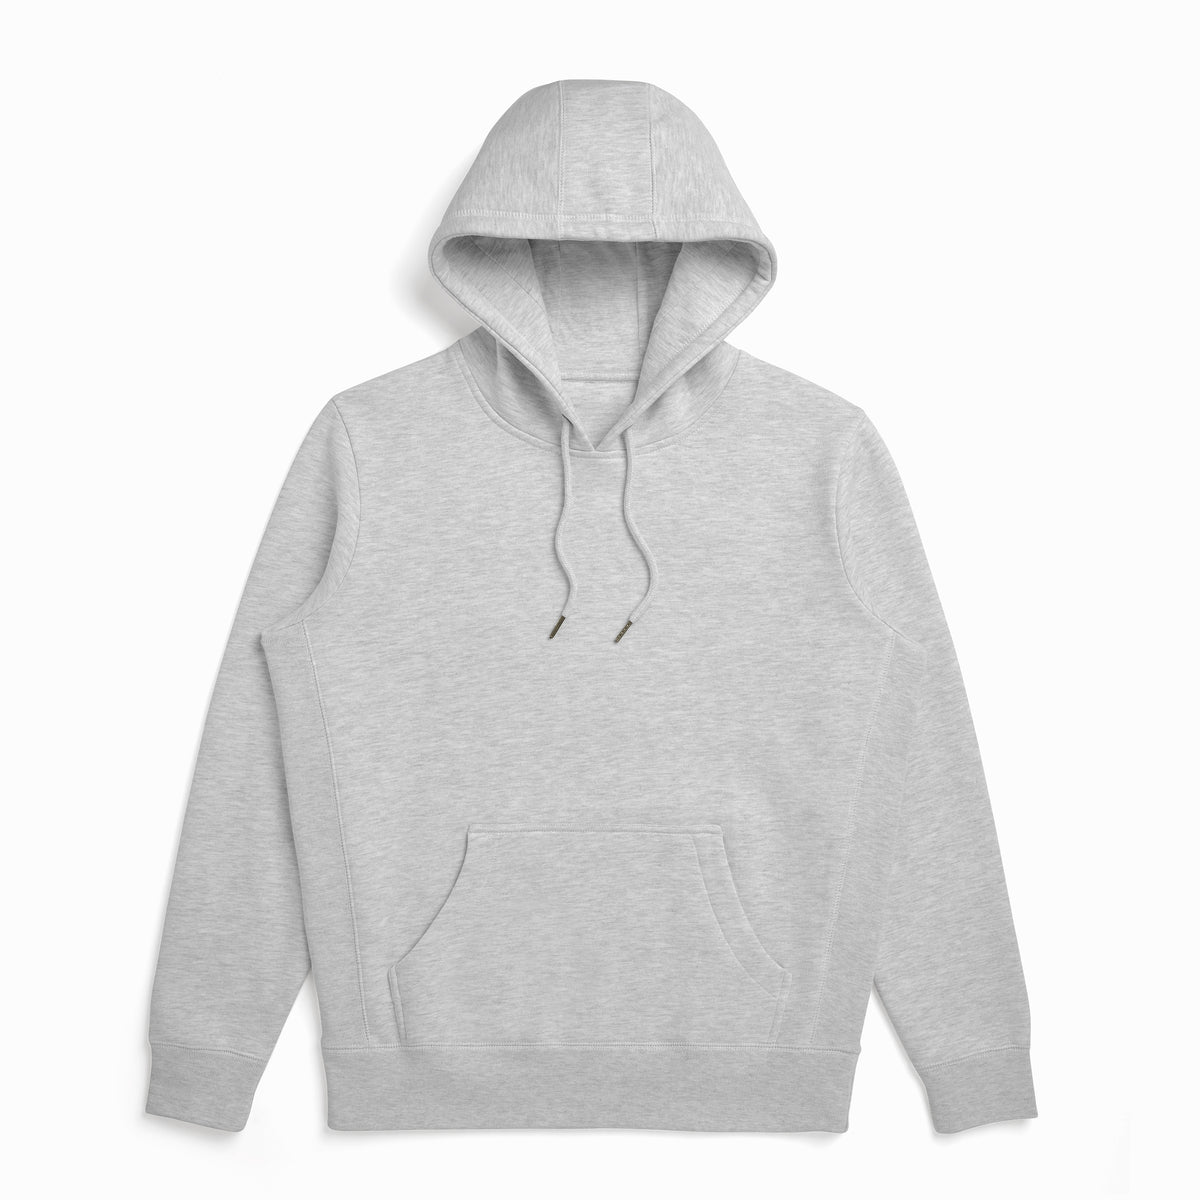 Simms Lager Script Hoodie - Charcoal Heather - Size Large - NOW ON SALE